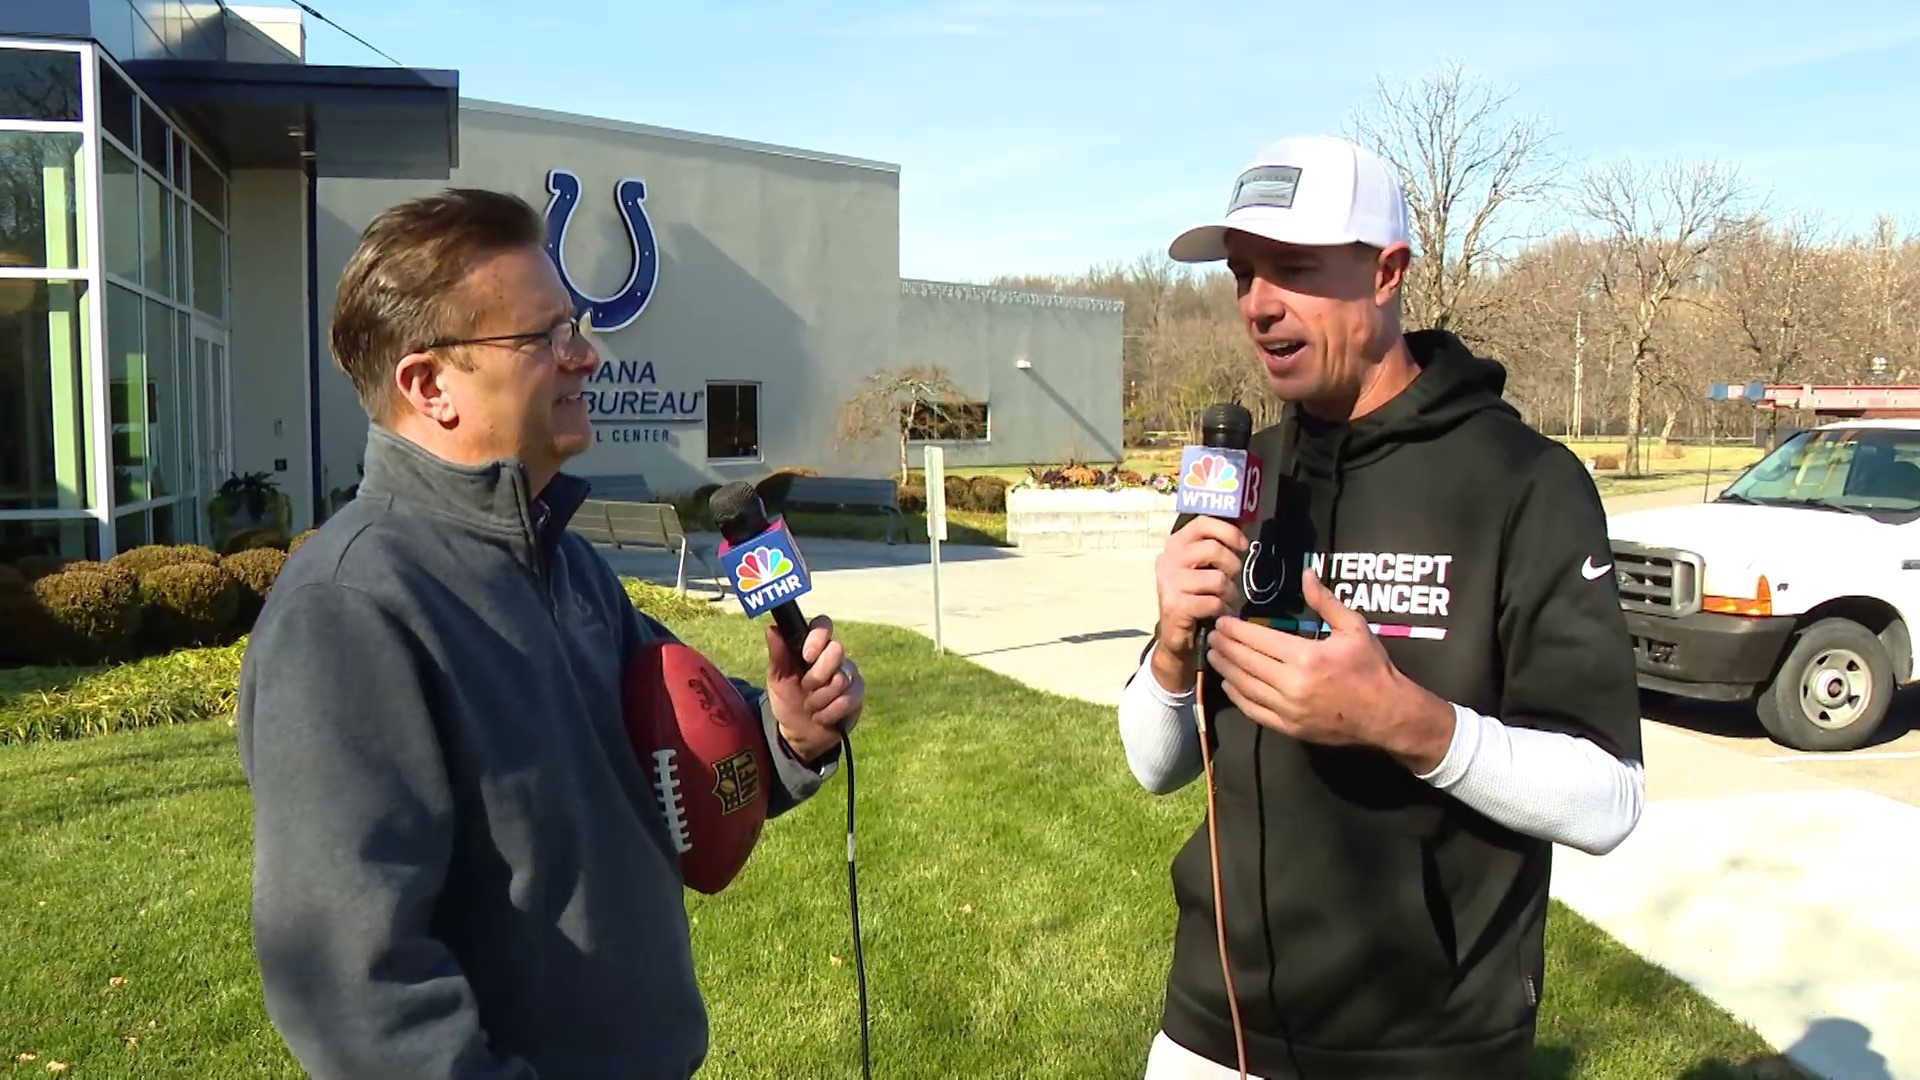 Colts QB Matt Ryan says the team needs to be firing on all cylinders for Monday night football against the Steelers.